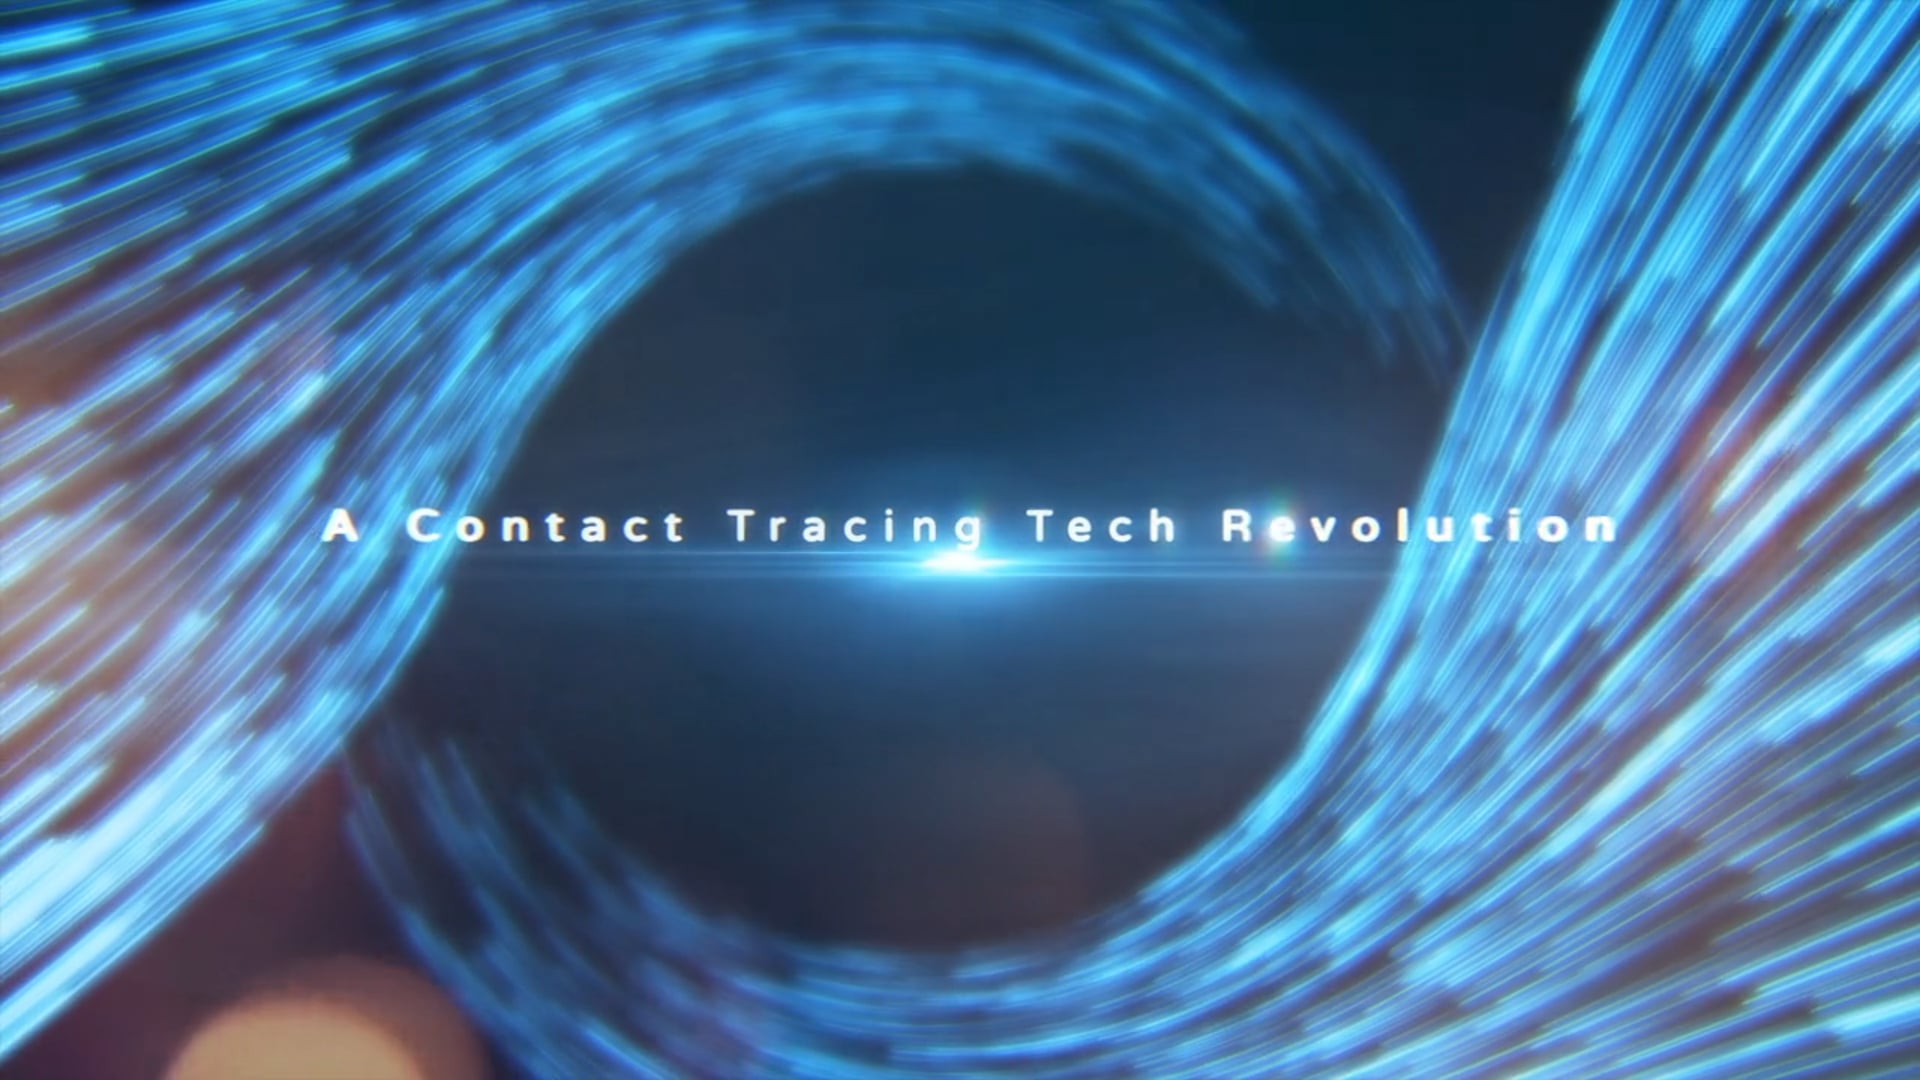 Contact Tracing & Facial Recognition